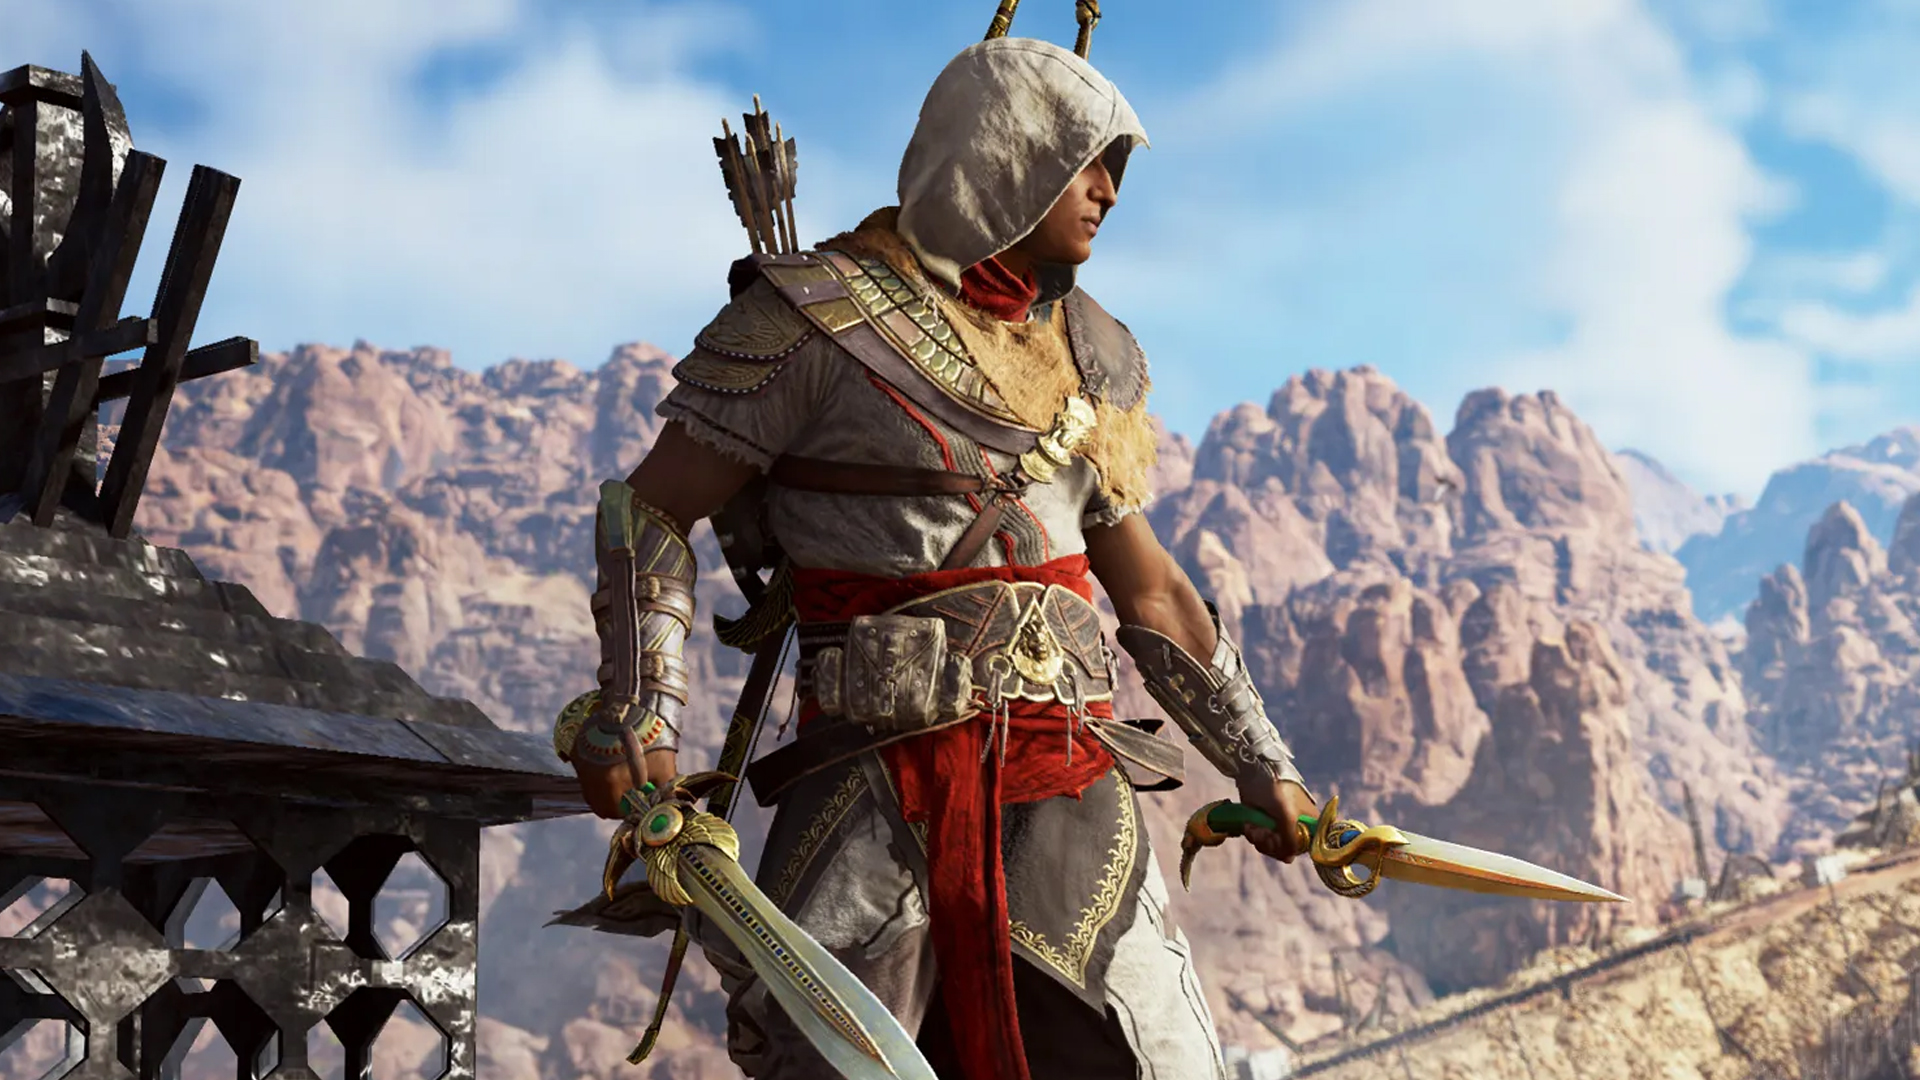 Xbox Game Pass June games include Assassin's Creed Origins